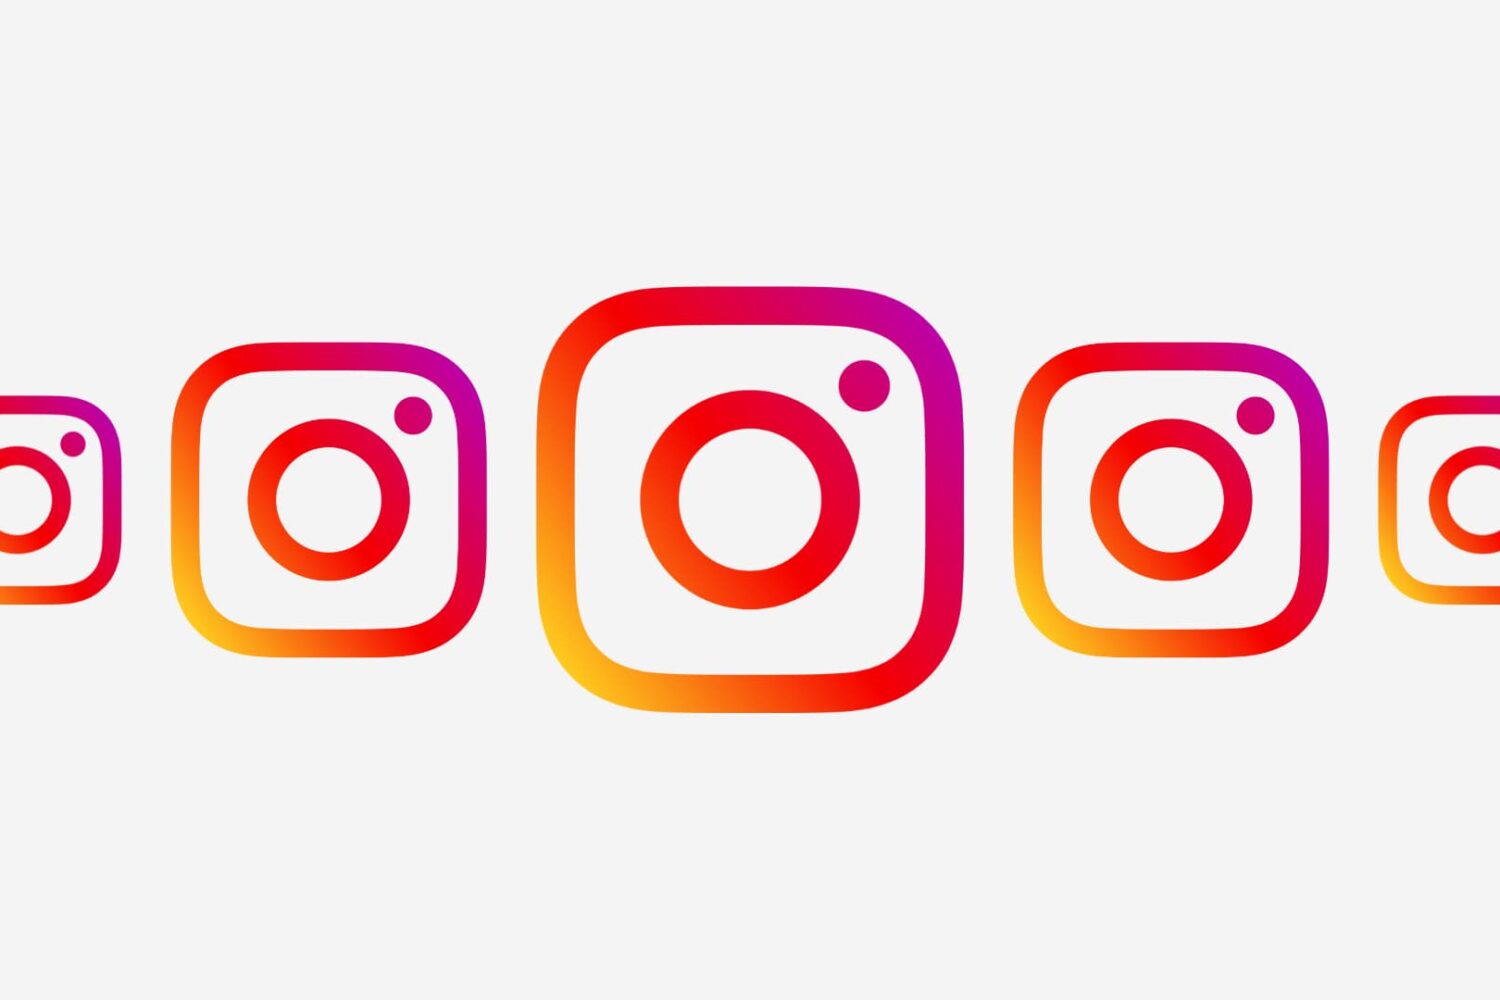 Multiple Instagram logos placed next to each other